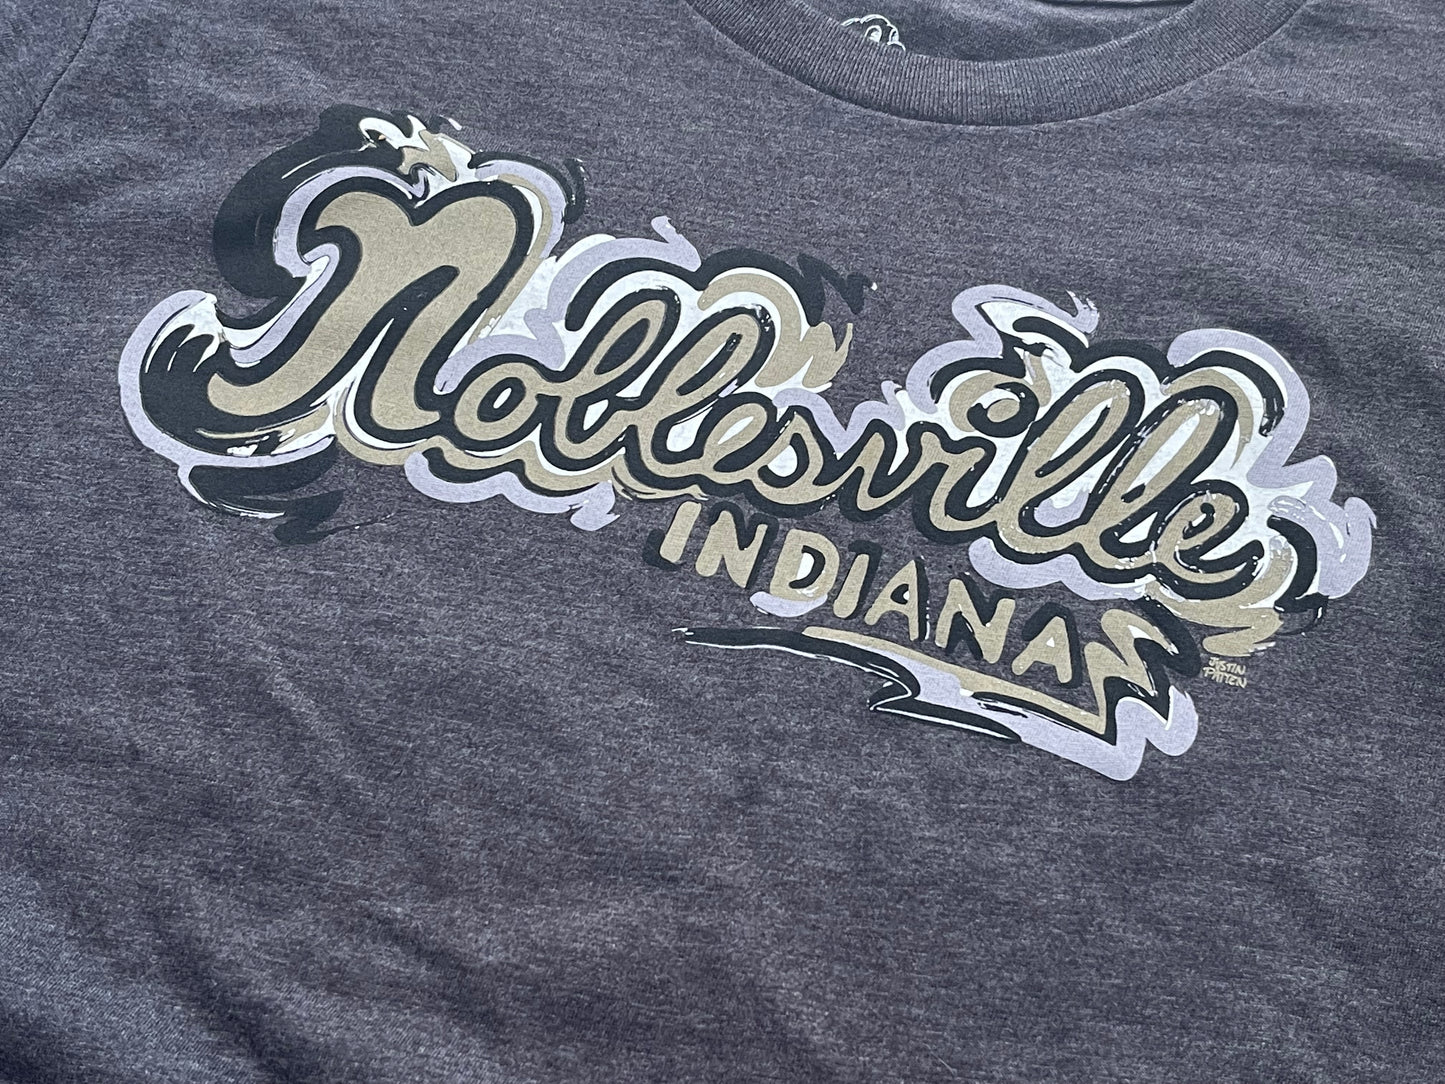 Noblesville Indiana Unisex Tee by Justin Patten